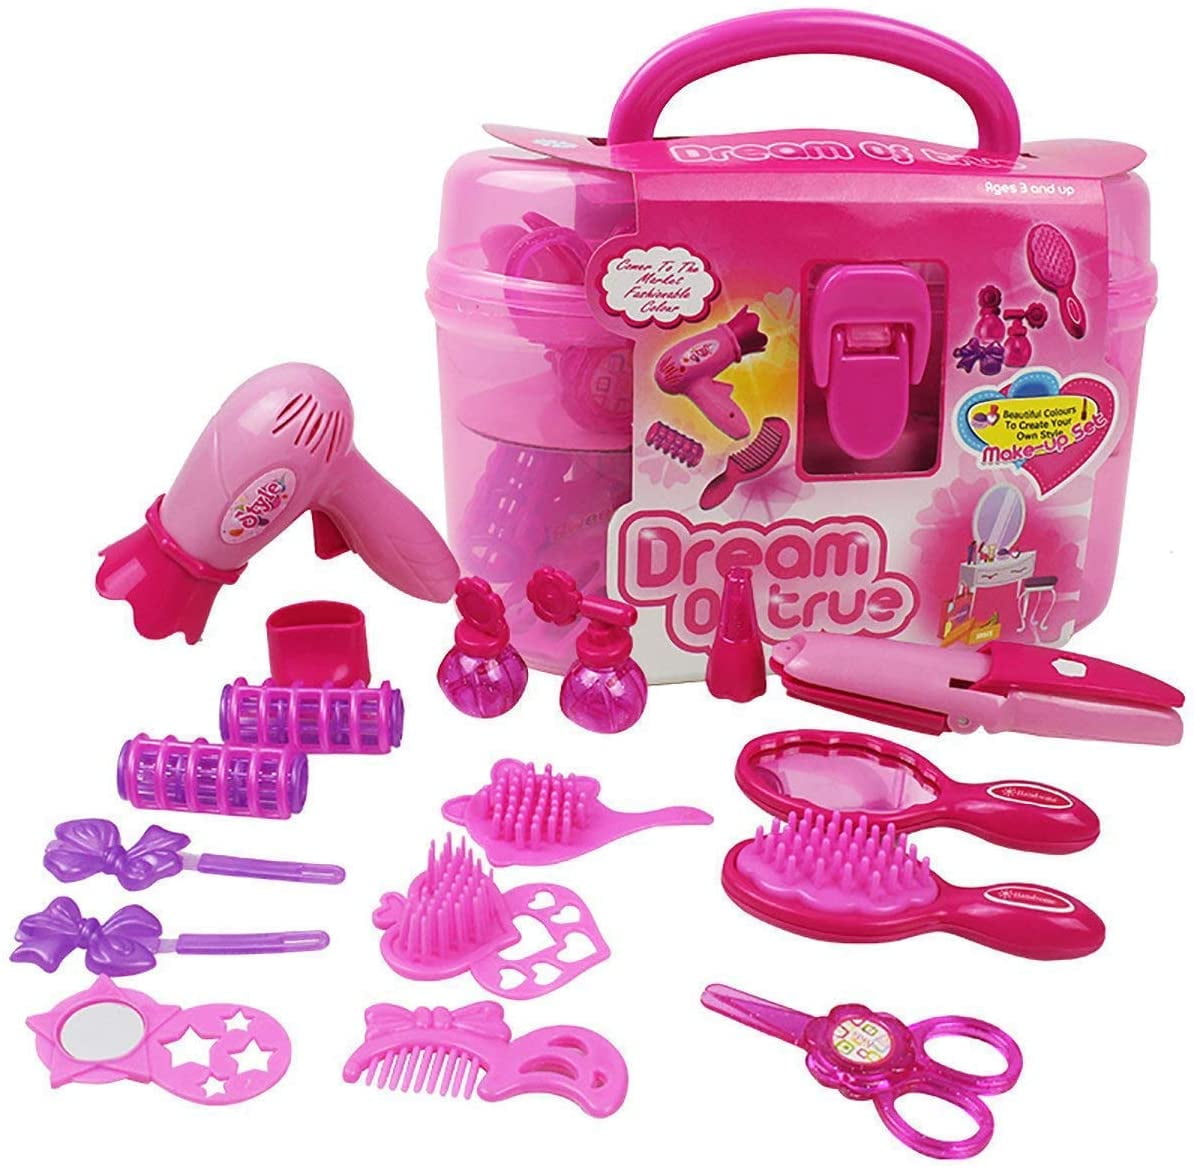 Kids Beauty Salon Set Toys Little Girl Makeup Kit Pretend Play Hair Station  with Case, Hairdryer, Brush,Mirror & Styling(17pcs) Toy for little girl 1 2  3 4 5 6 7 8 Years Old 